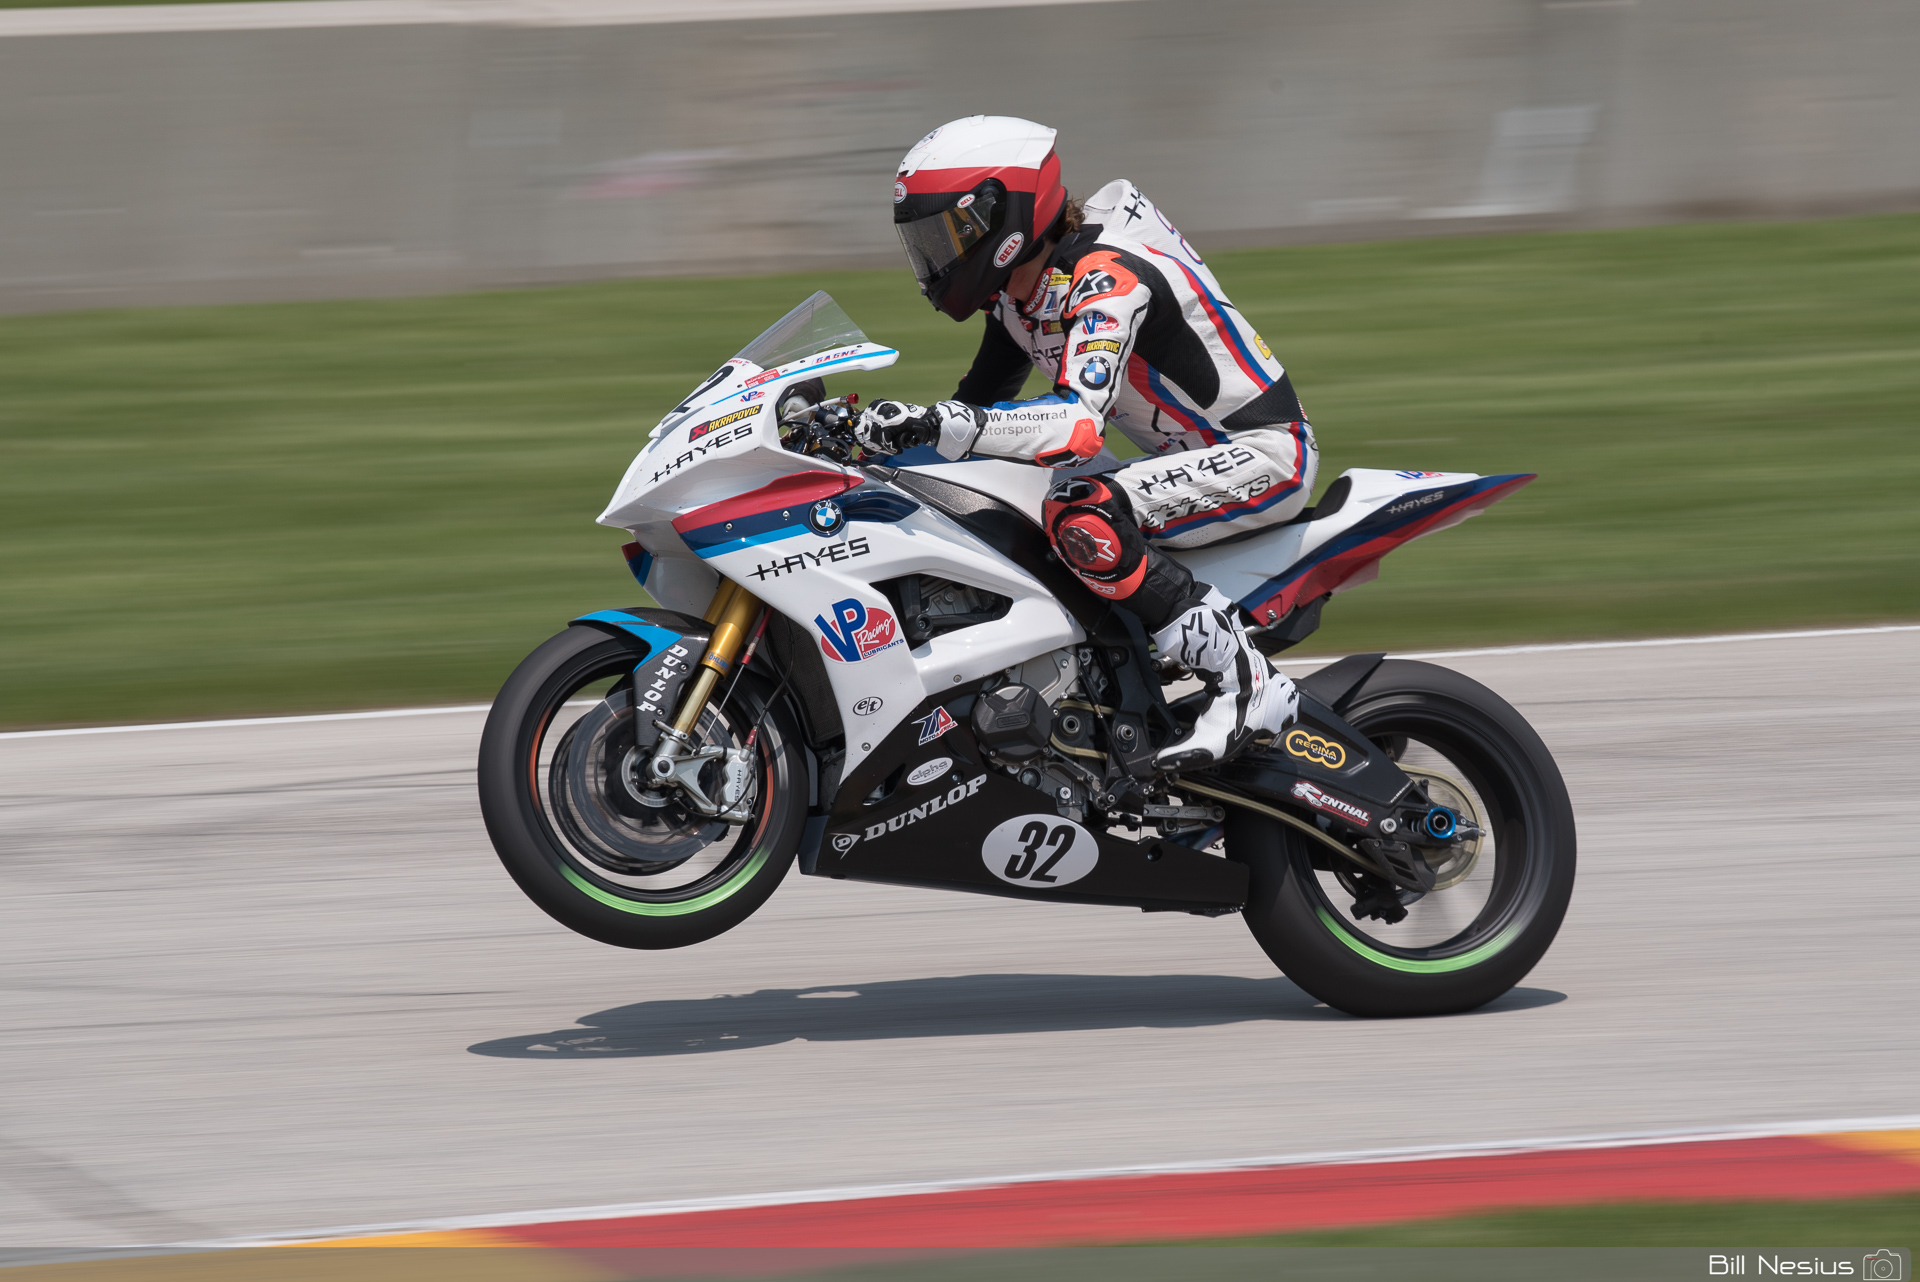 Jake Gagne on the Number 32 Scheibe Racing BMW S100RR3